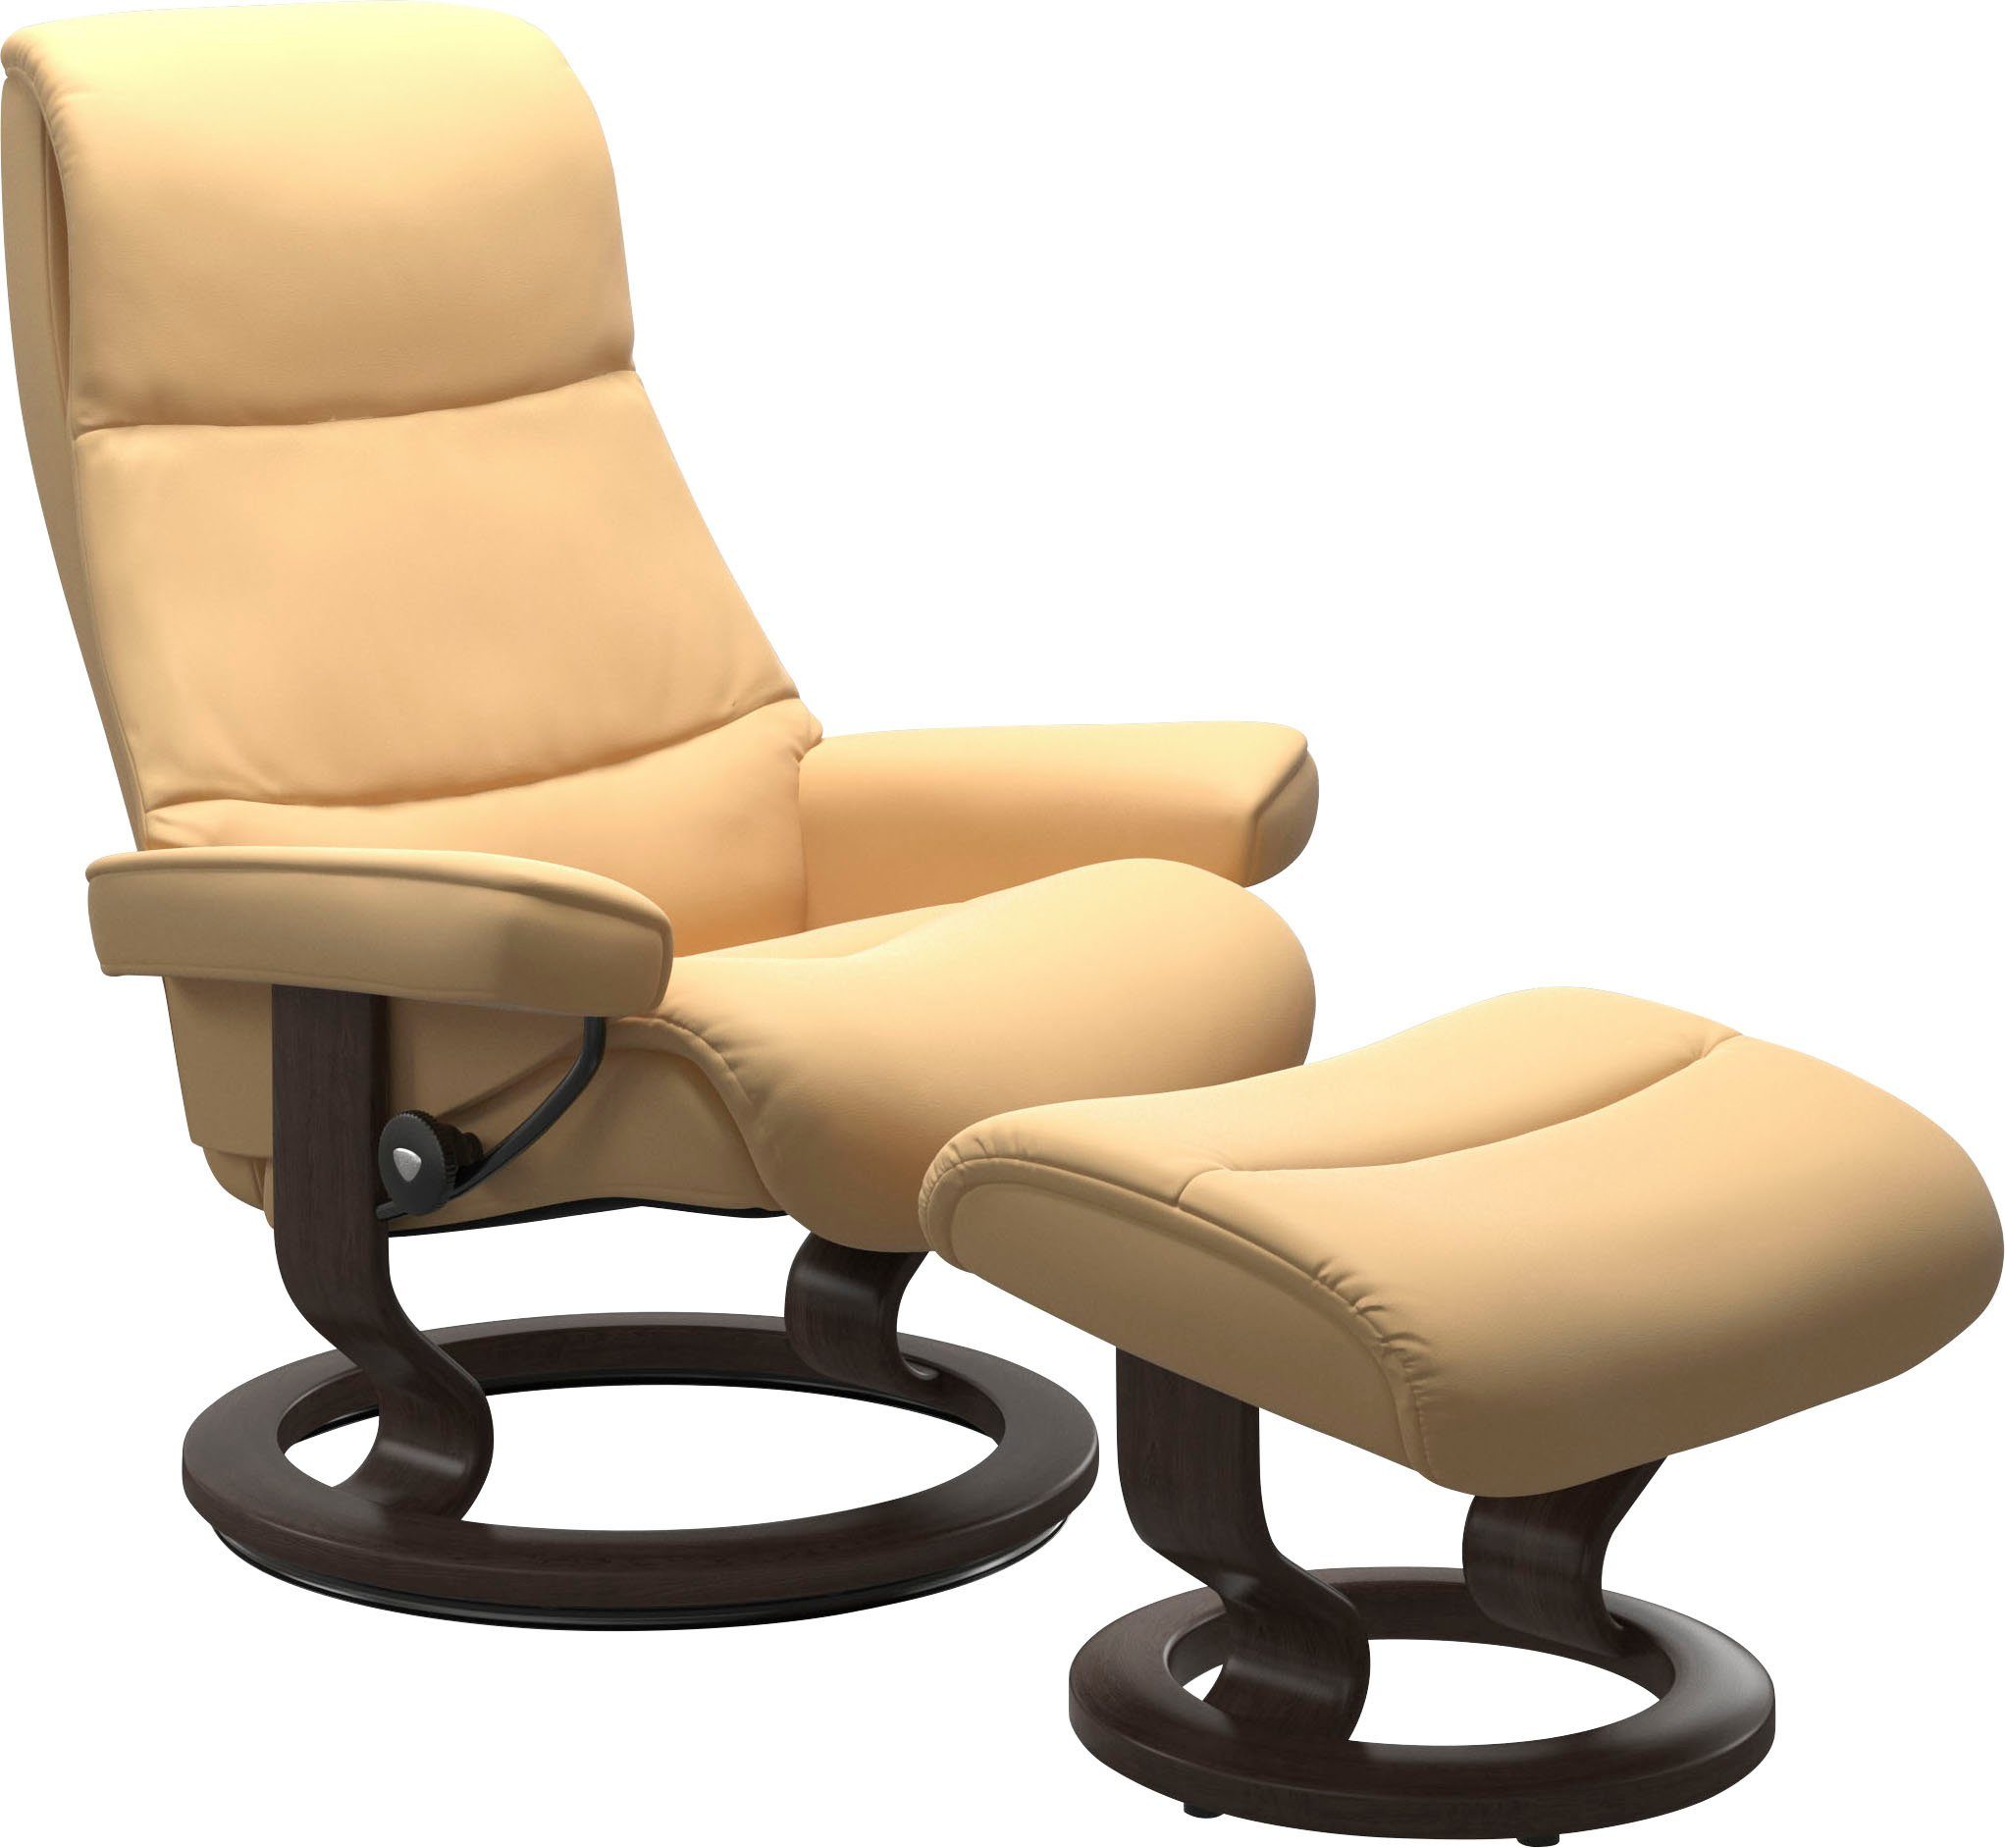 Stressless® Classic View, Relaxsessel M,Gestell mit Wenge Base, Größe